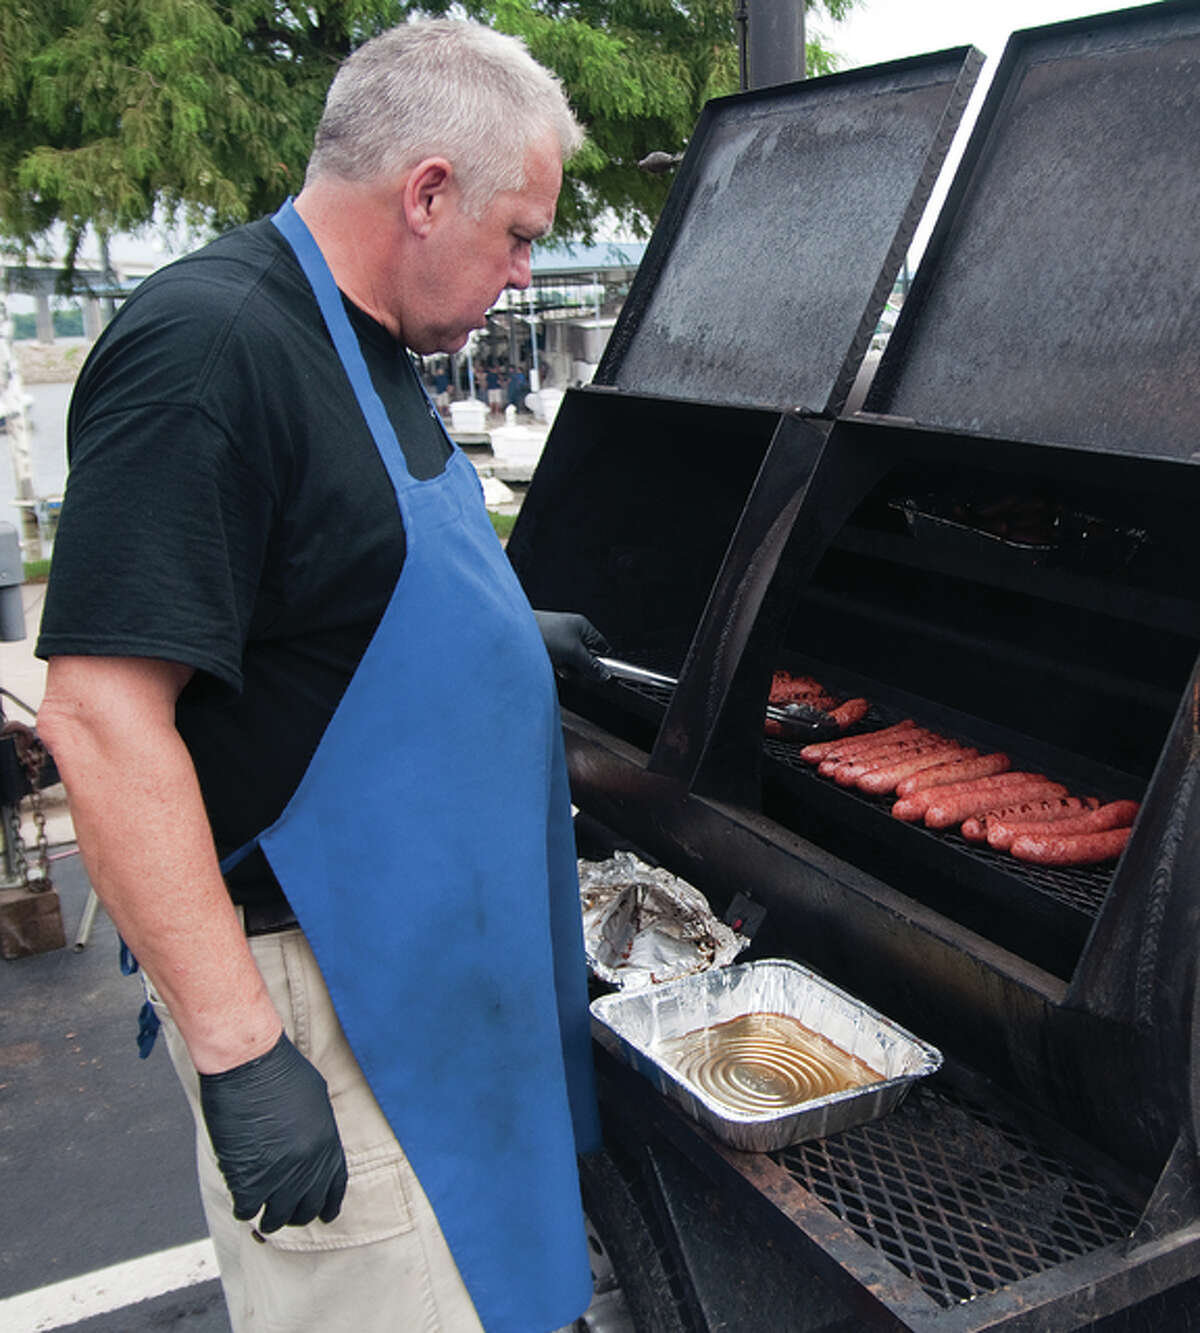 Chemist-by-day Bill Stork, who is a professional BBQ chef and owner of Riverbend-based Black Iron BBQ, enticed people with his brats, pulled pork, brisket and hot dogs Saturday night at the Alton Marina during its free 19th anniversary party.